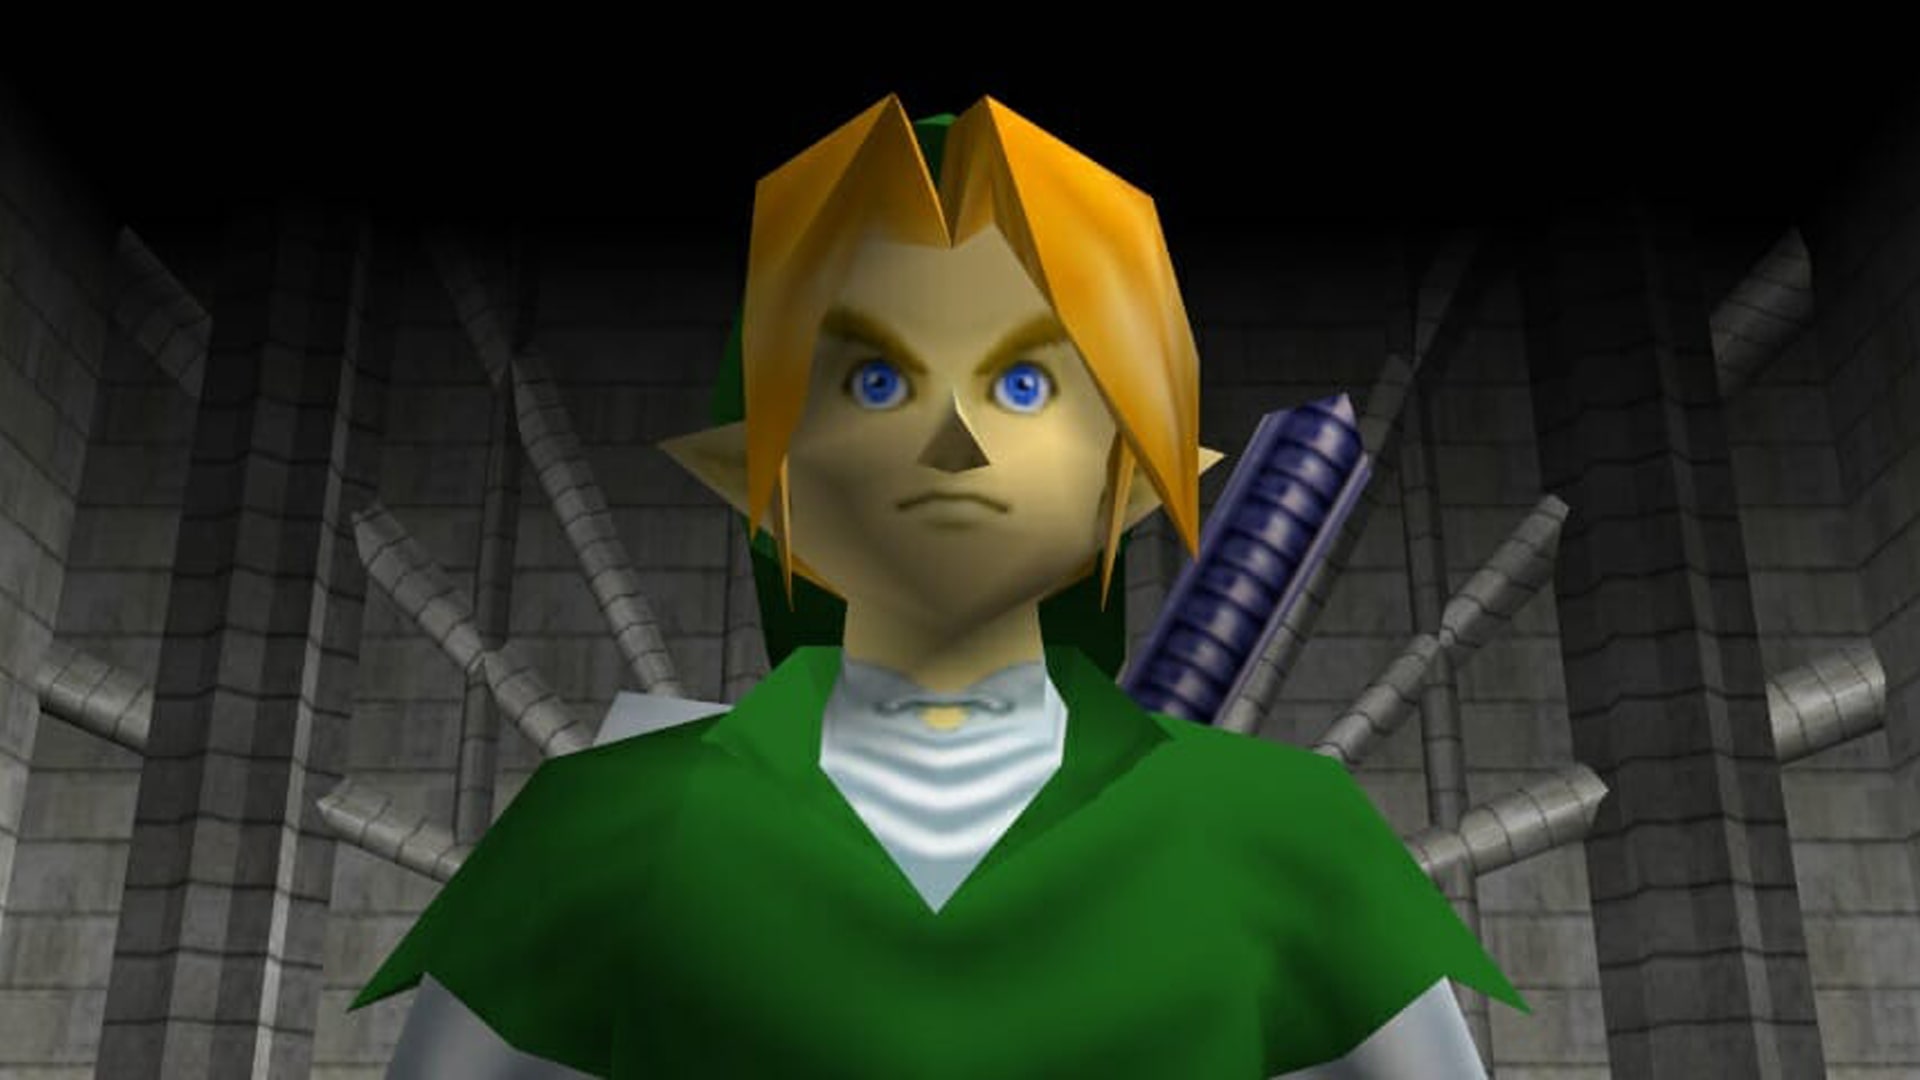 Adult Link from The Legend of Zelda: Ocarina of Time